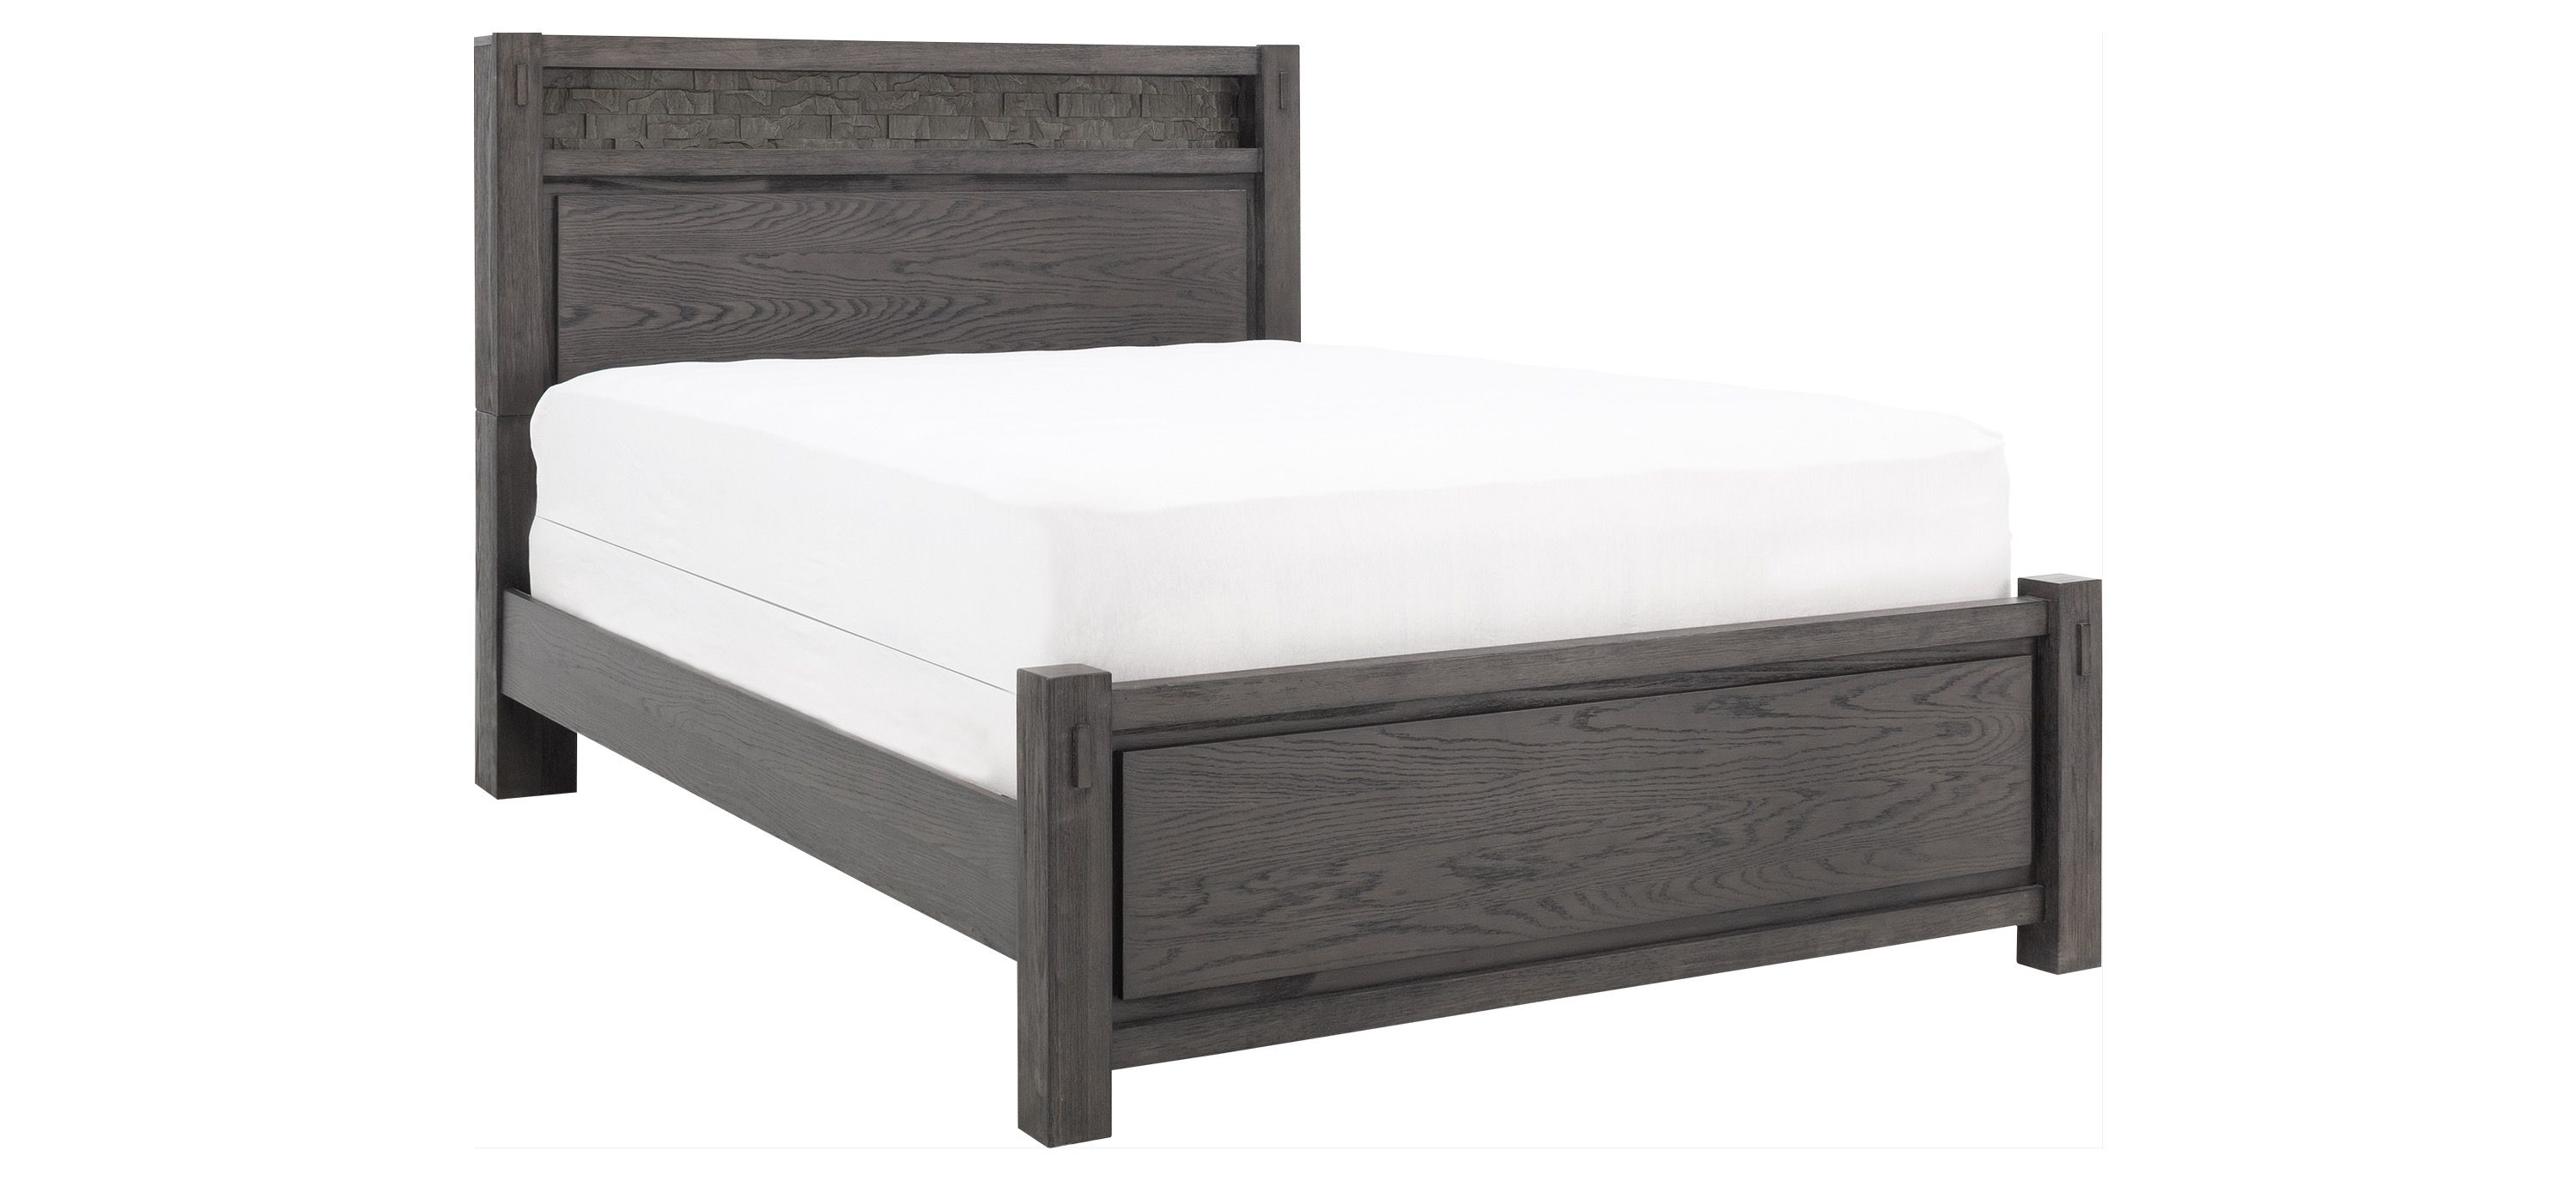 Rockwell Bed